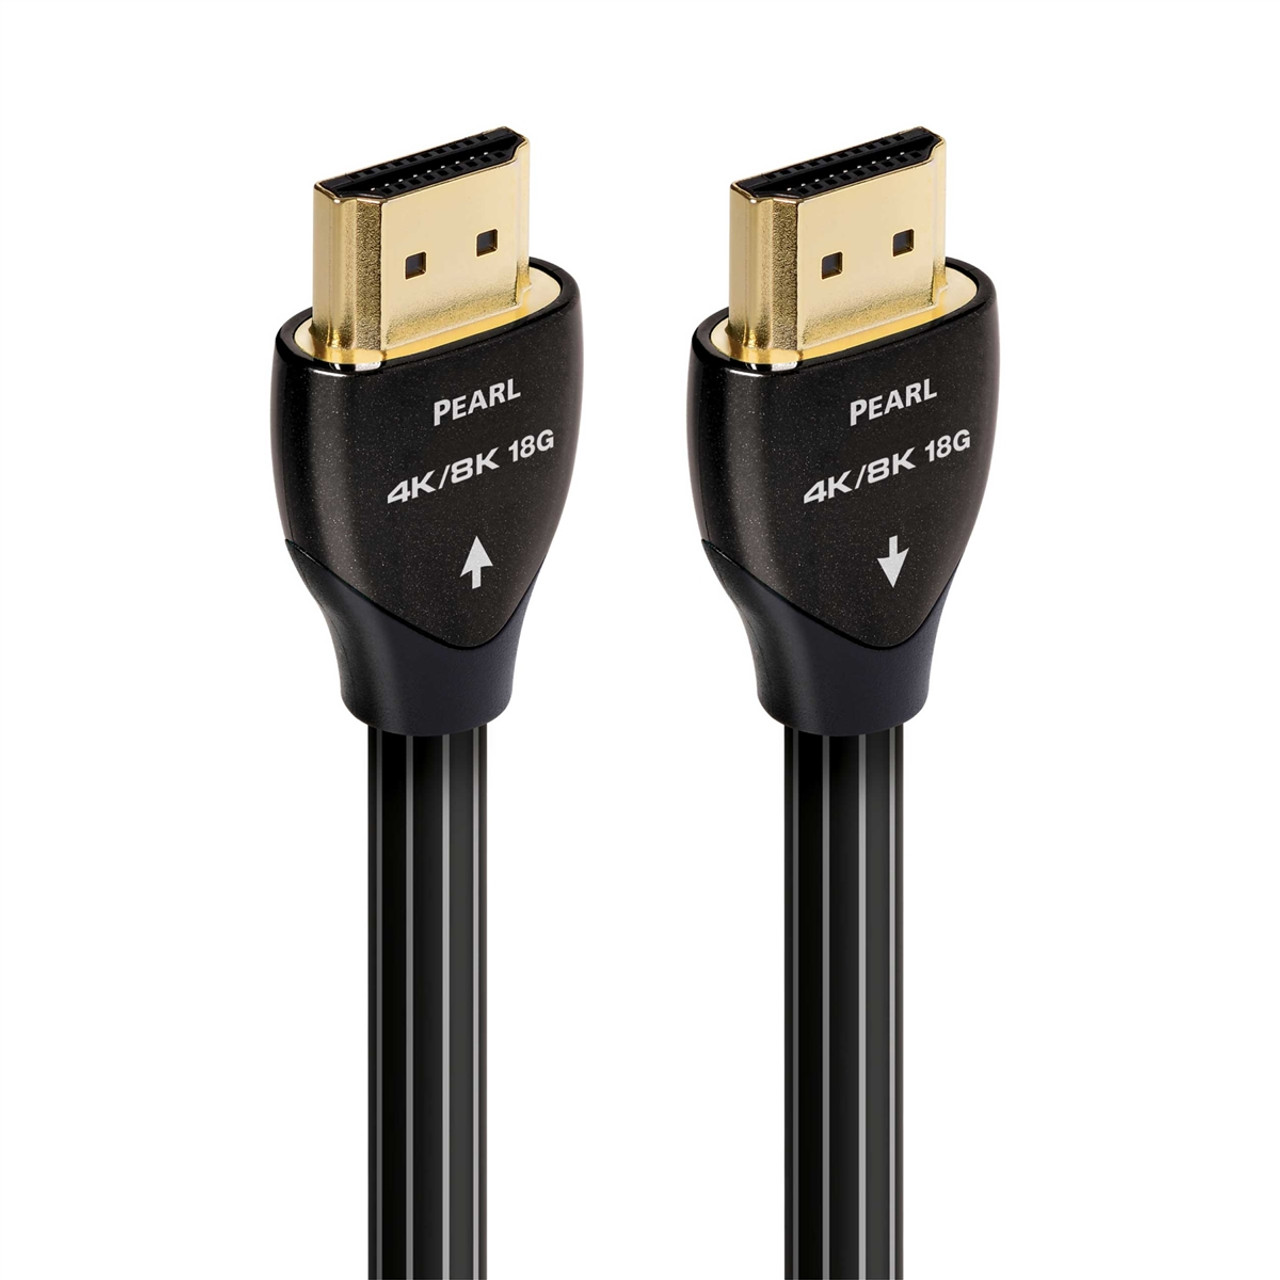 CABLE HDMI-2.0 2 m - HDMI Cables up to 2 m Length - Delta